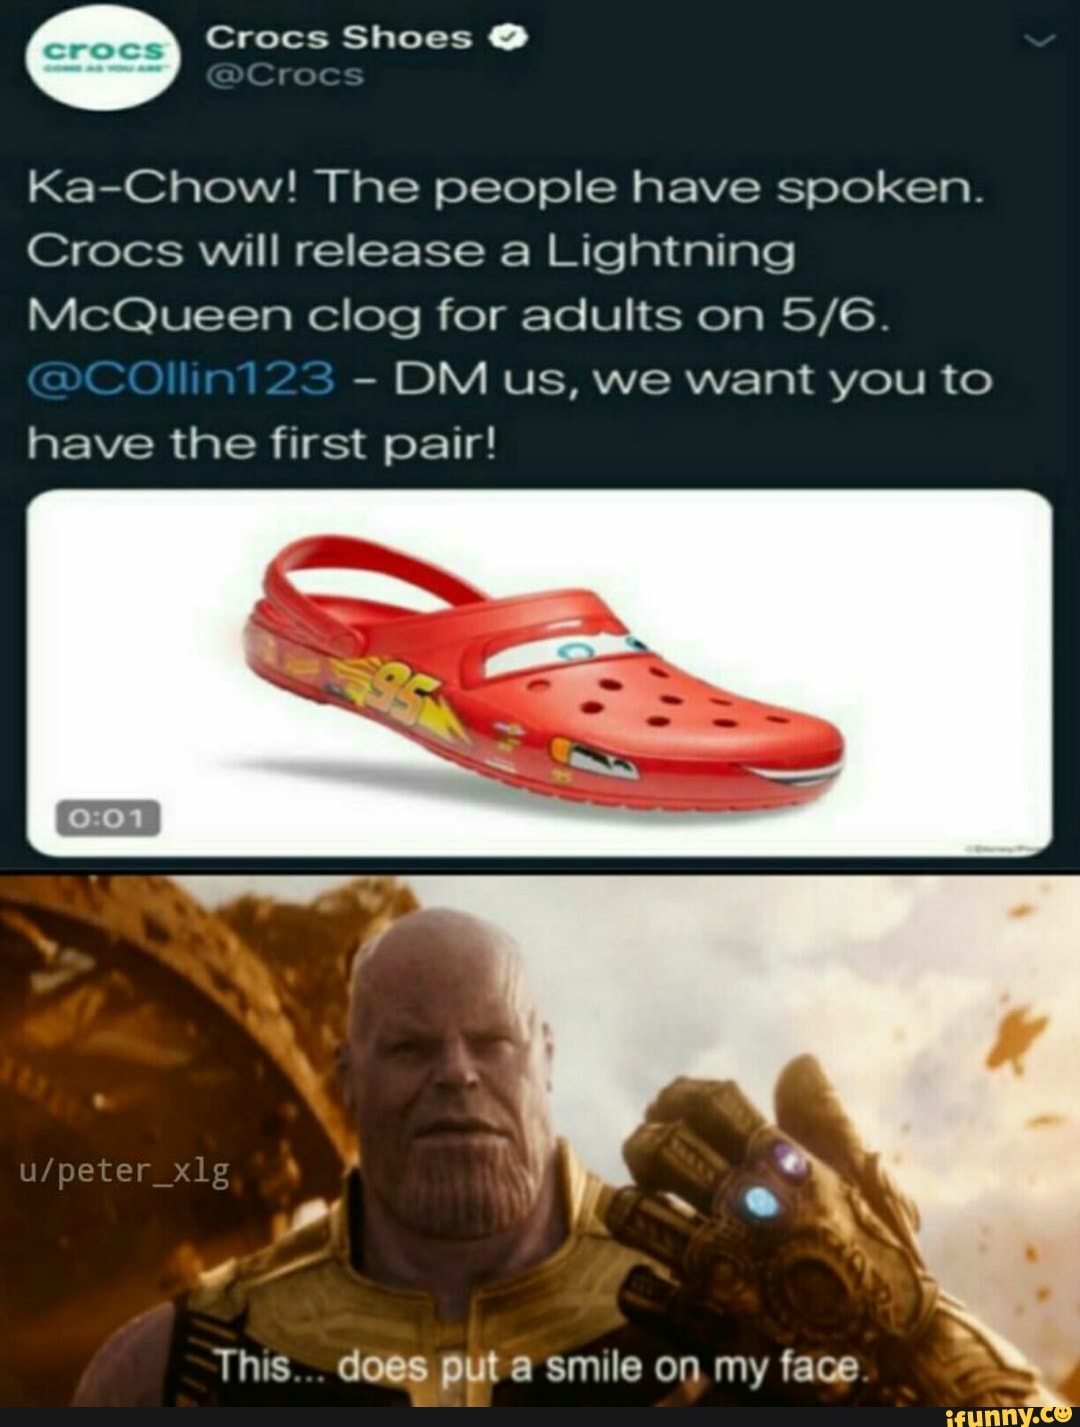 Crocs on X: Ka-Chow! The people have spoken. Crocs will release a